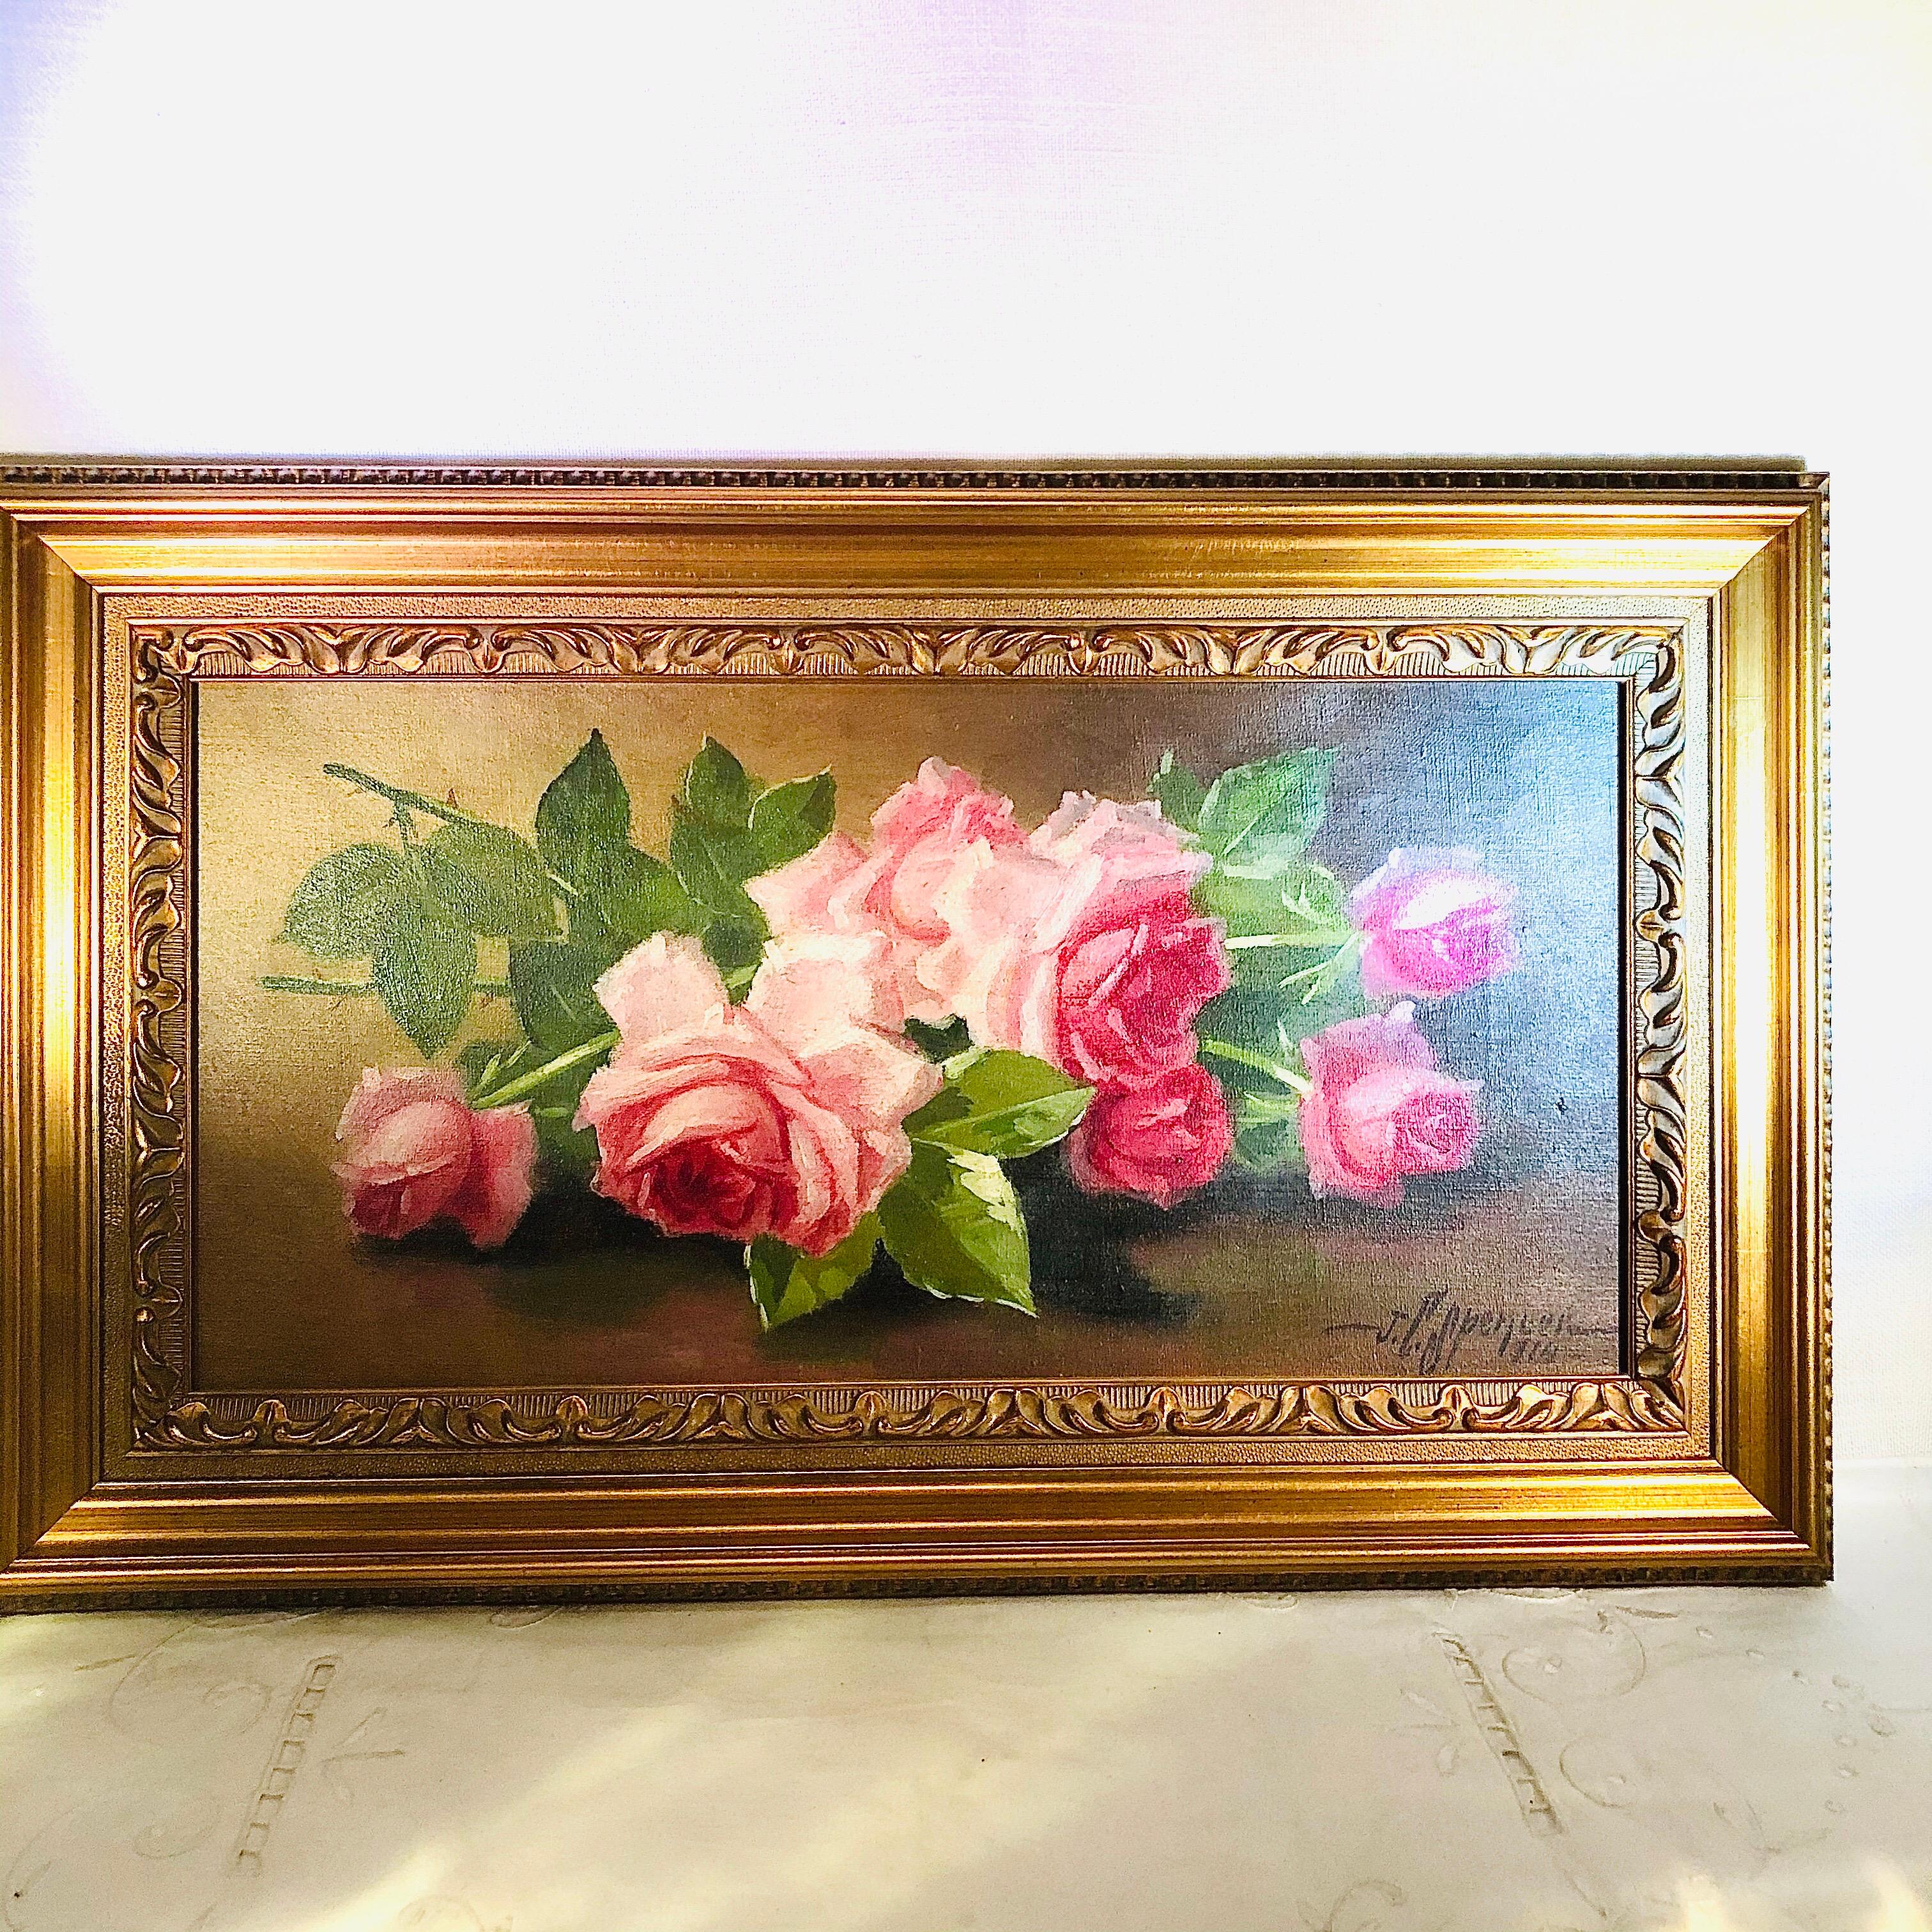 Hand-Painted Oil on Canvas of Pink Roses Signed J. C. Spencer and Dated 1916